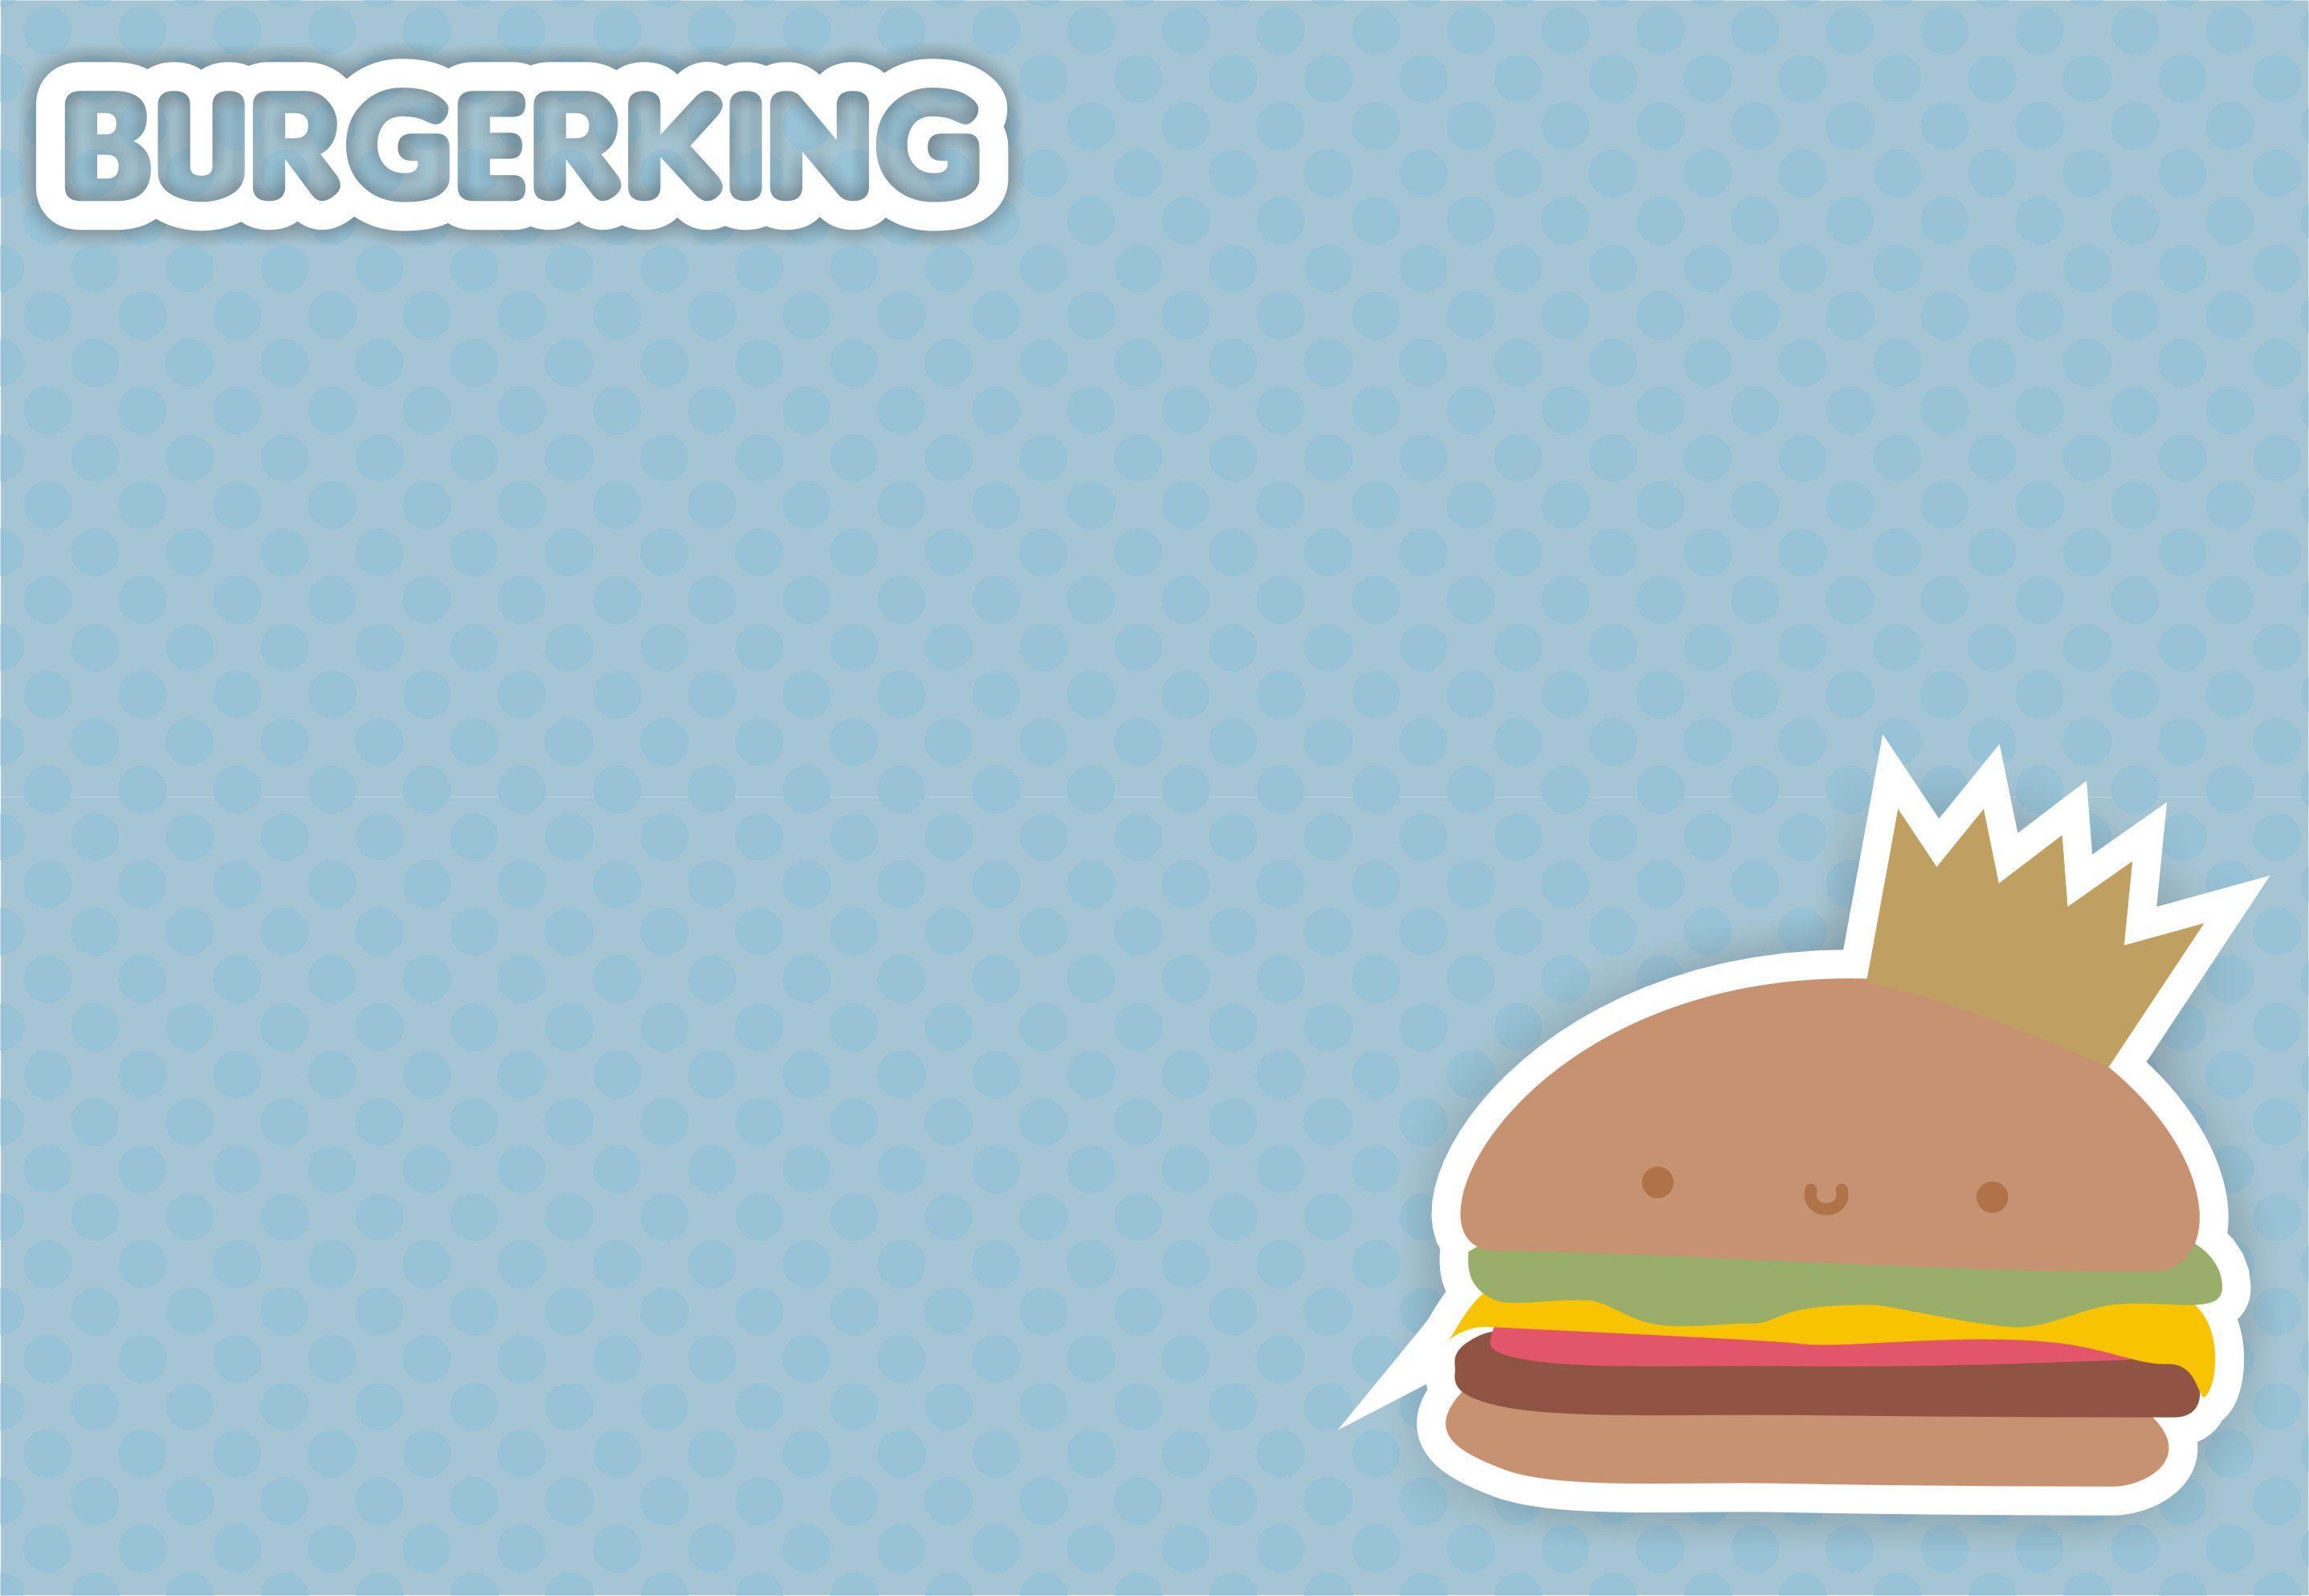 Burger King Hd Wallpapers Free Download, Burger King, Other